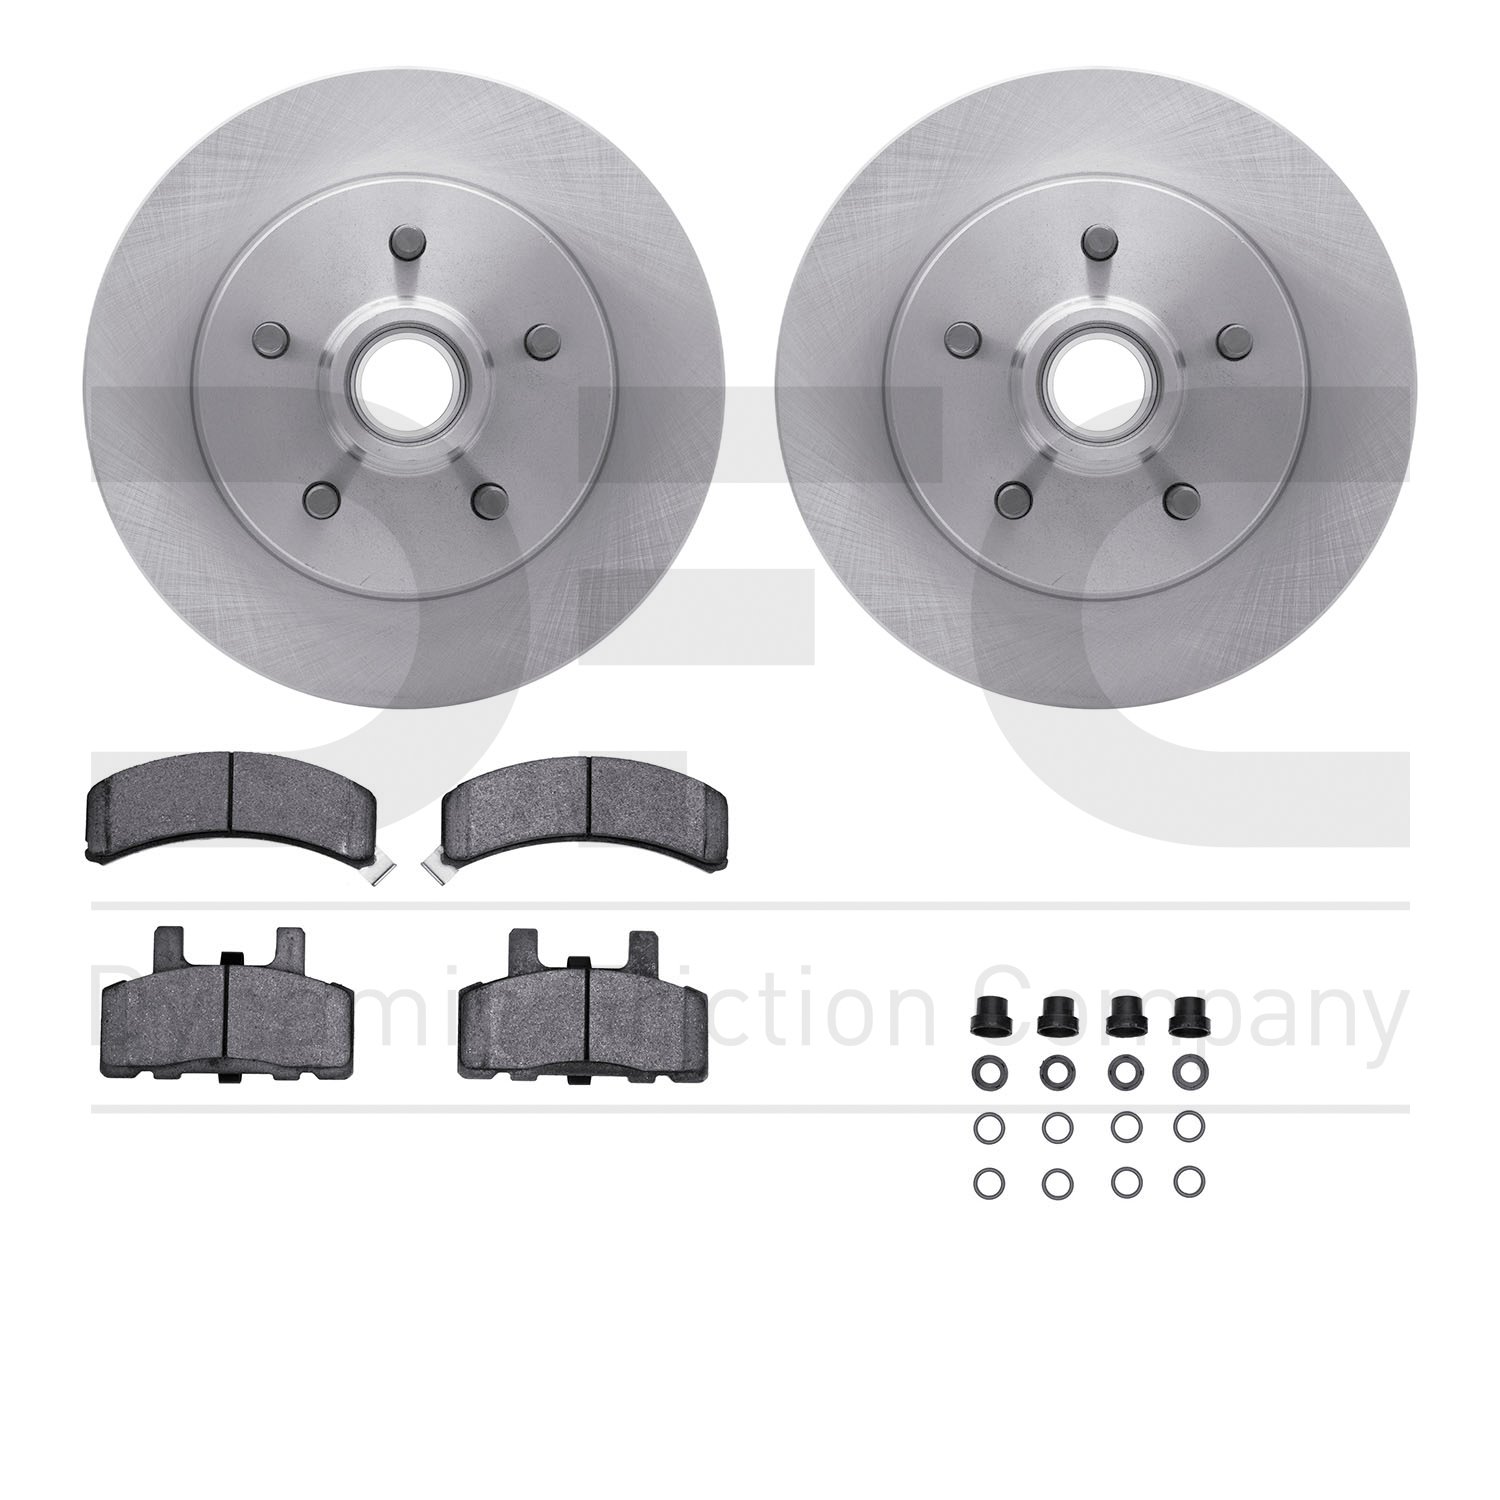 6412-48034 Brake Rotors with Ultimate-Duty Brake Pads Kit & Hardware, 1992-2002 GM, Position: Front